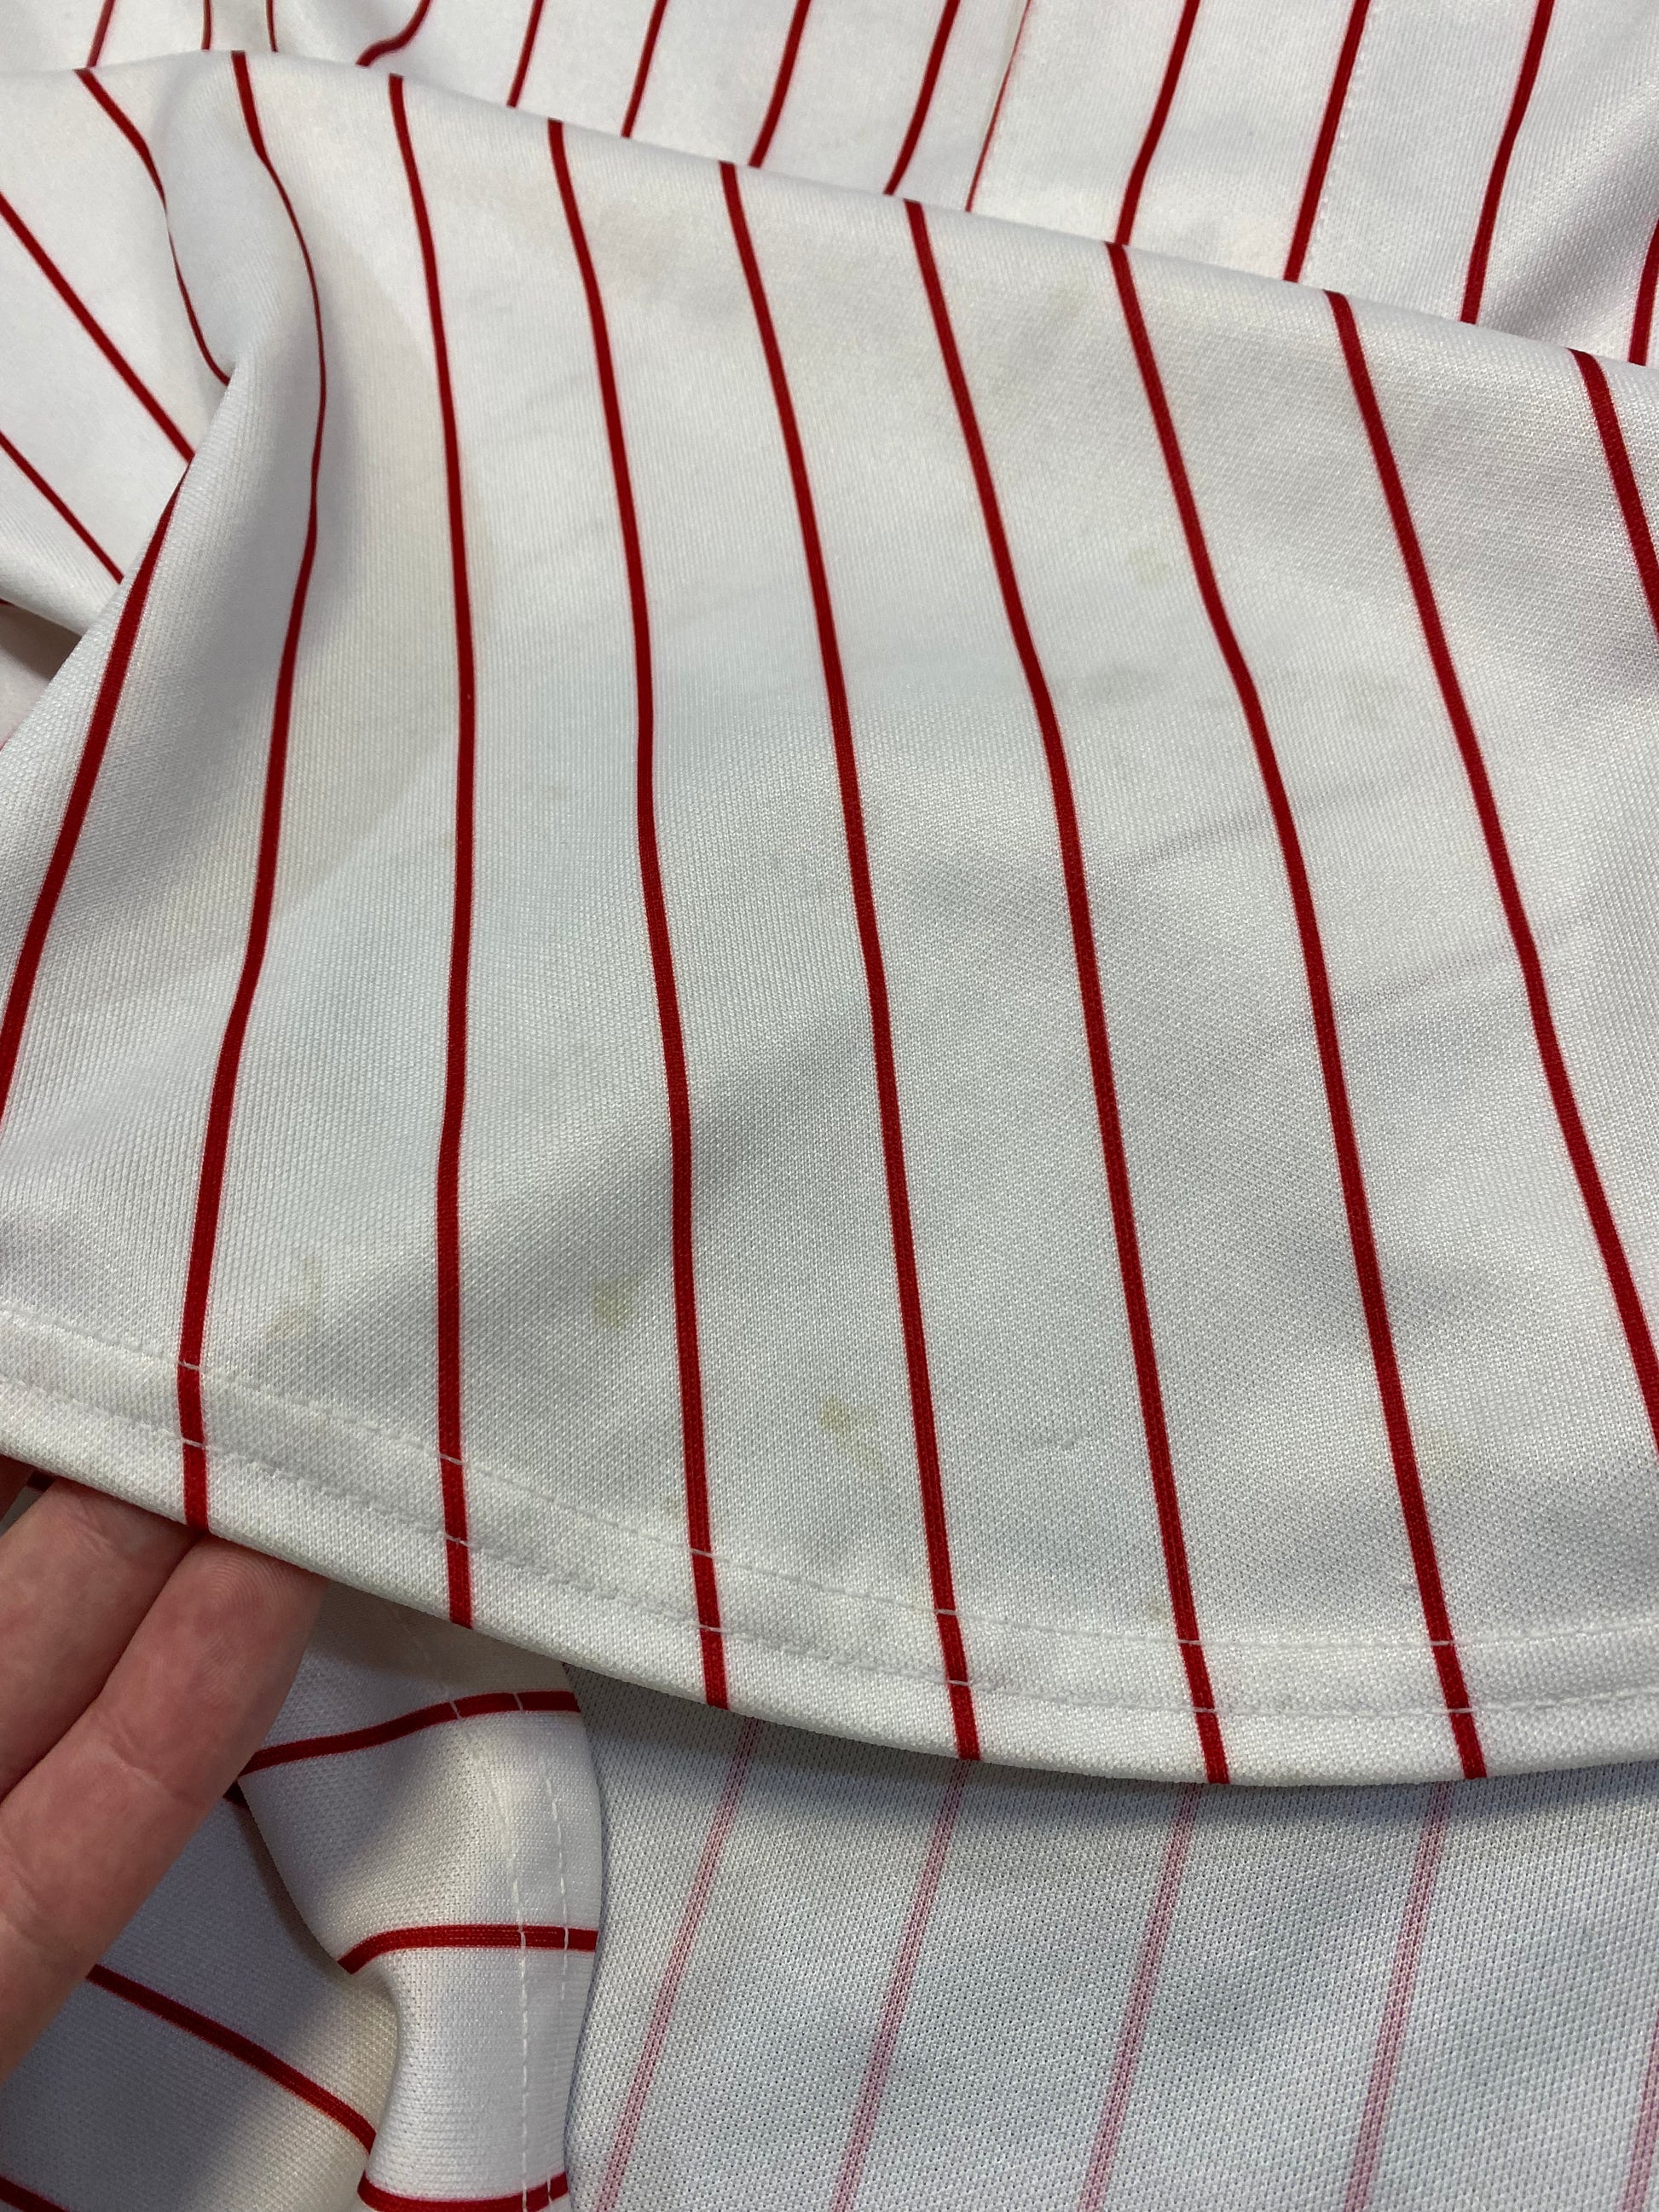 AUTHENTIC VINTAGE RYAN HOWARD PHILLIES CREAM JERSEY MAJESTIC COOL